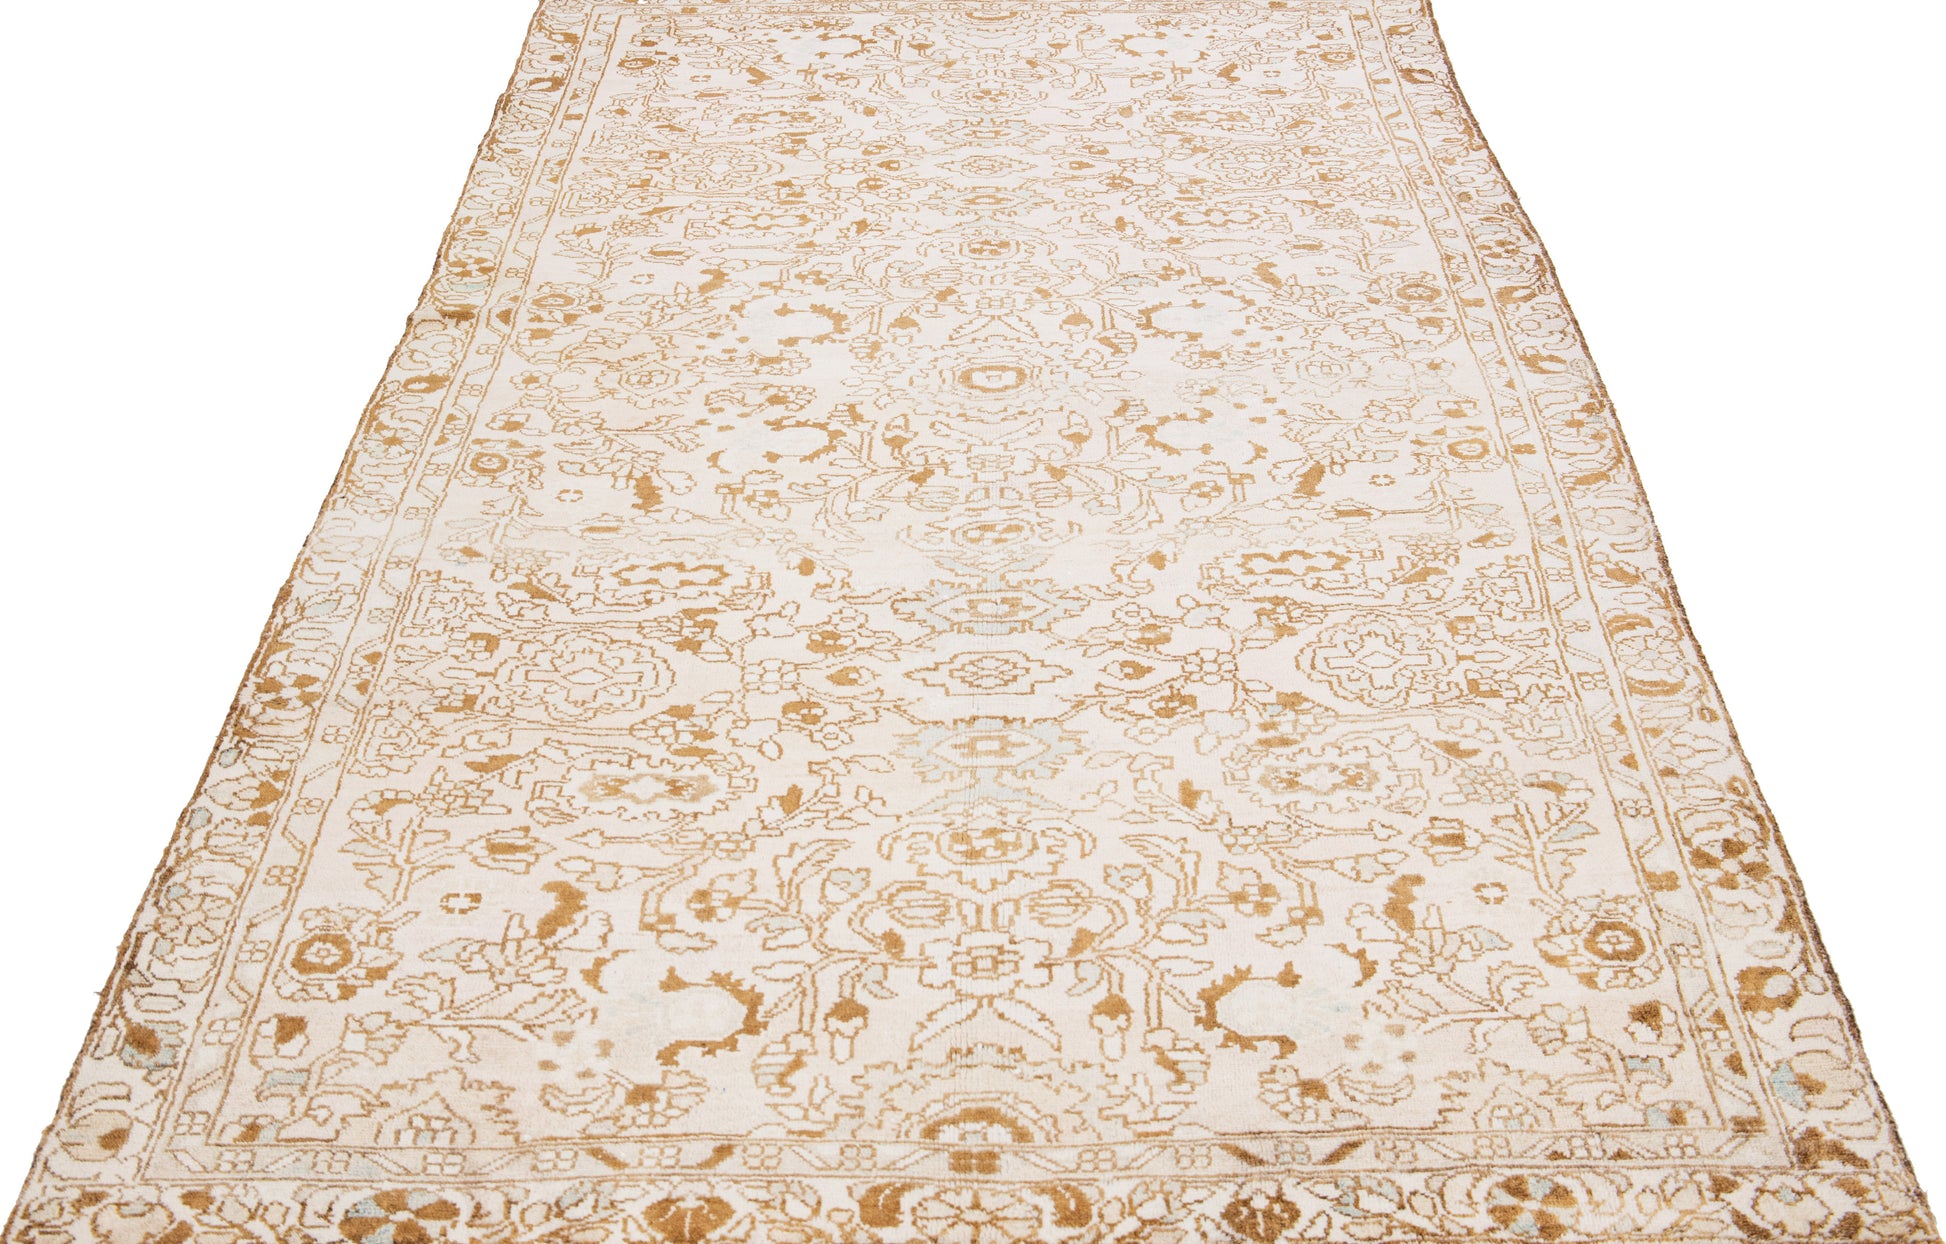 Zoomed out view of beige wool rug with floral designs and interwoven patterns